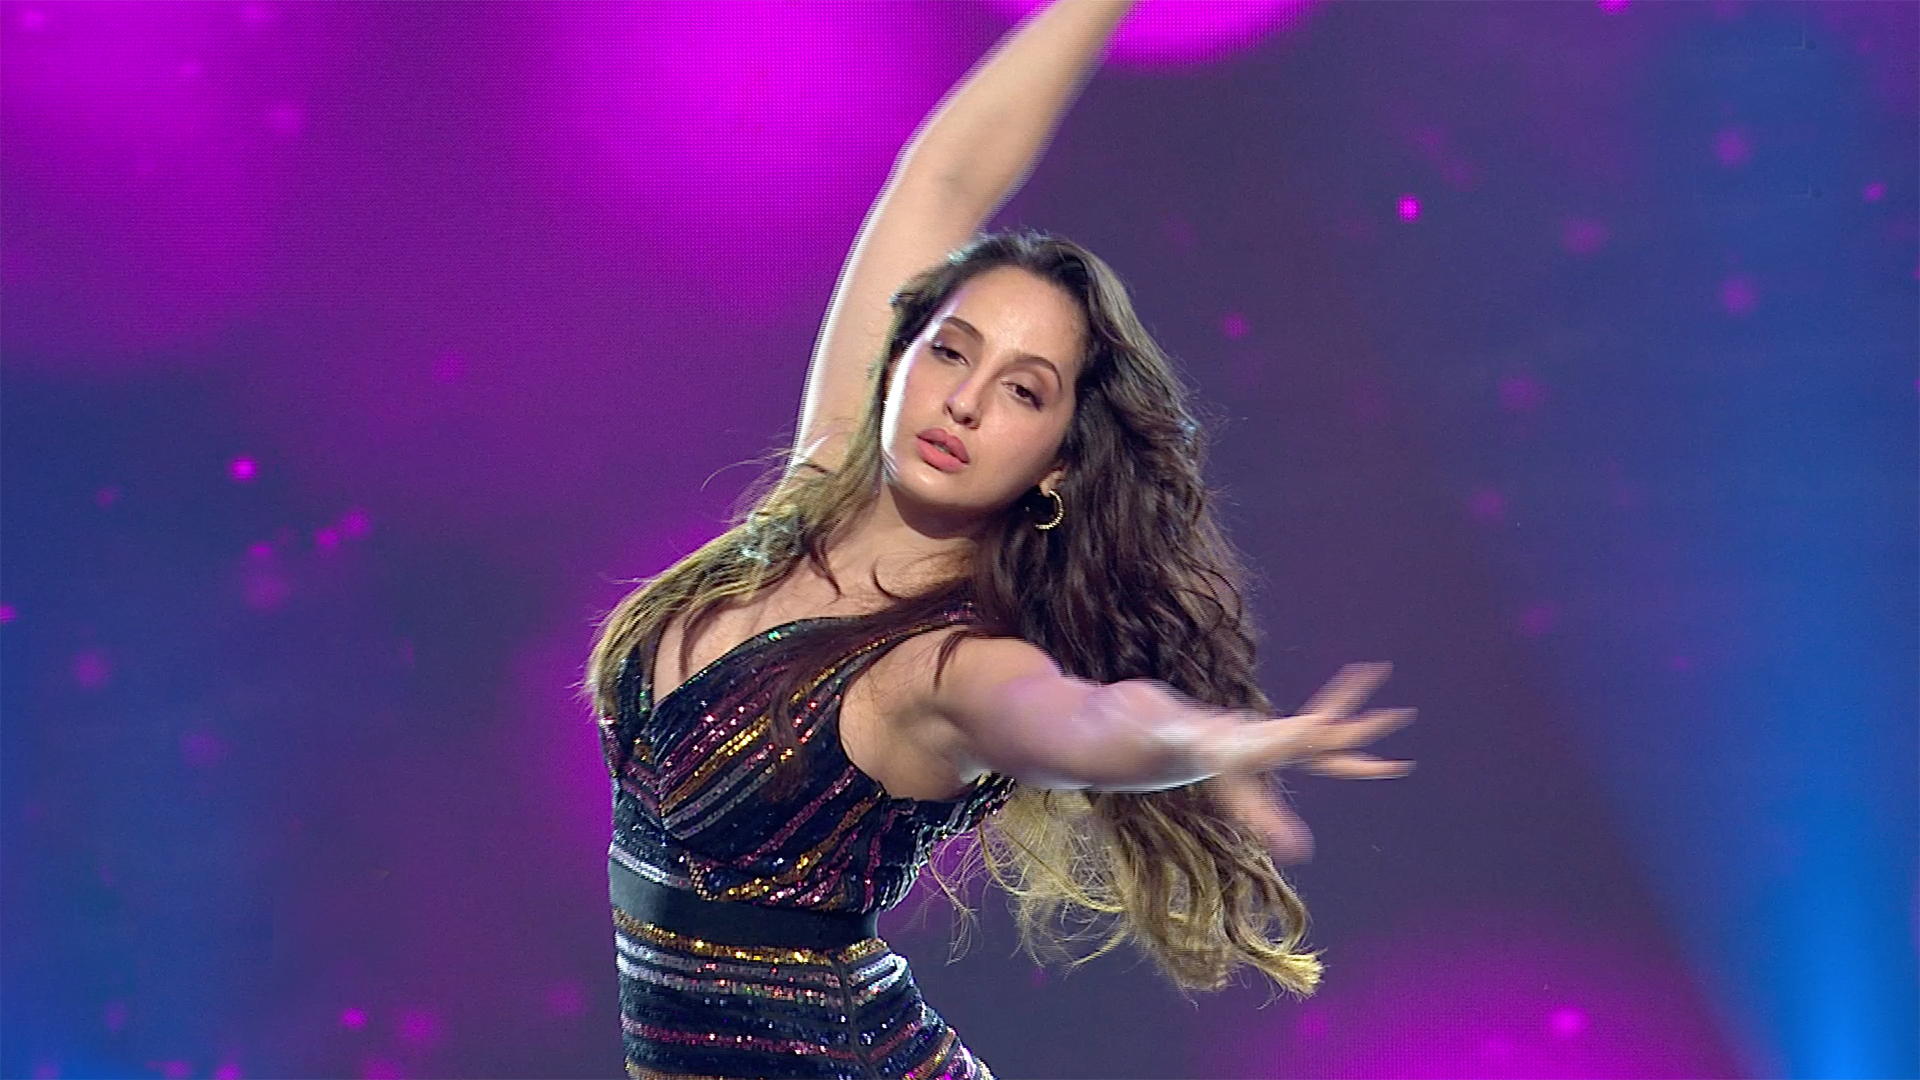 Nora Fatehi stuns fans with her dance moves in the song 